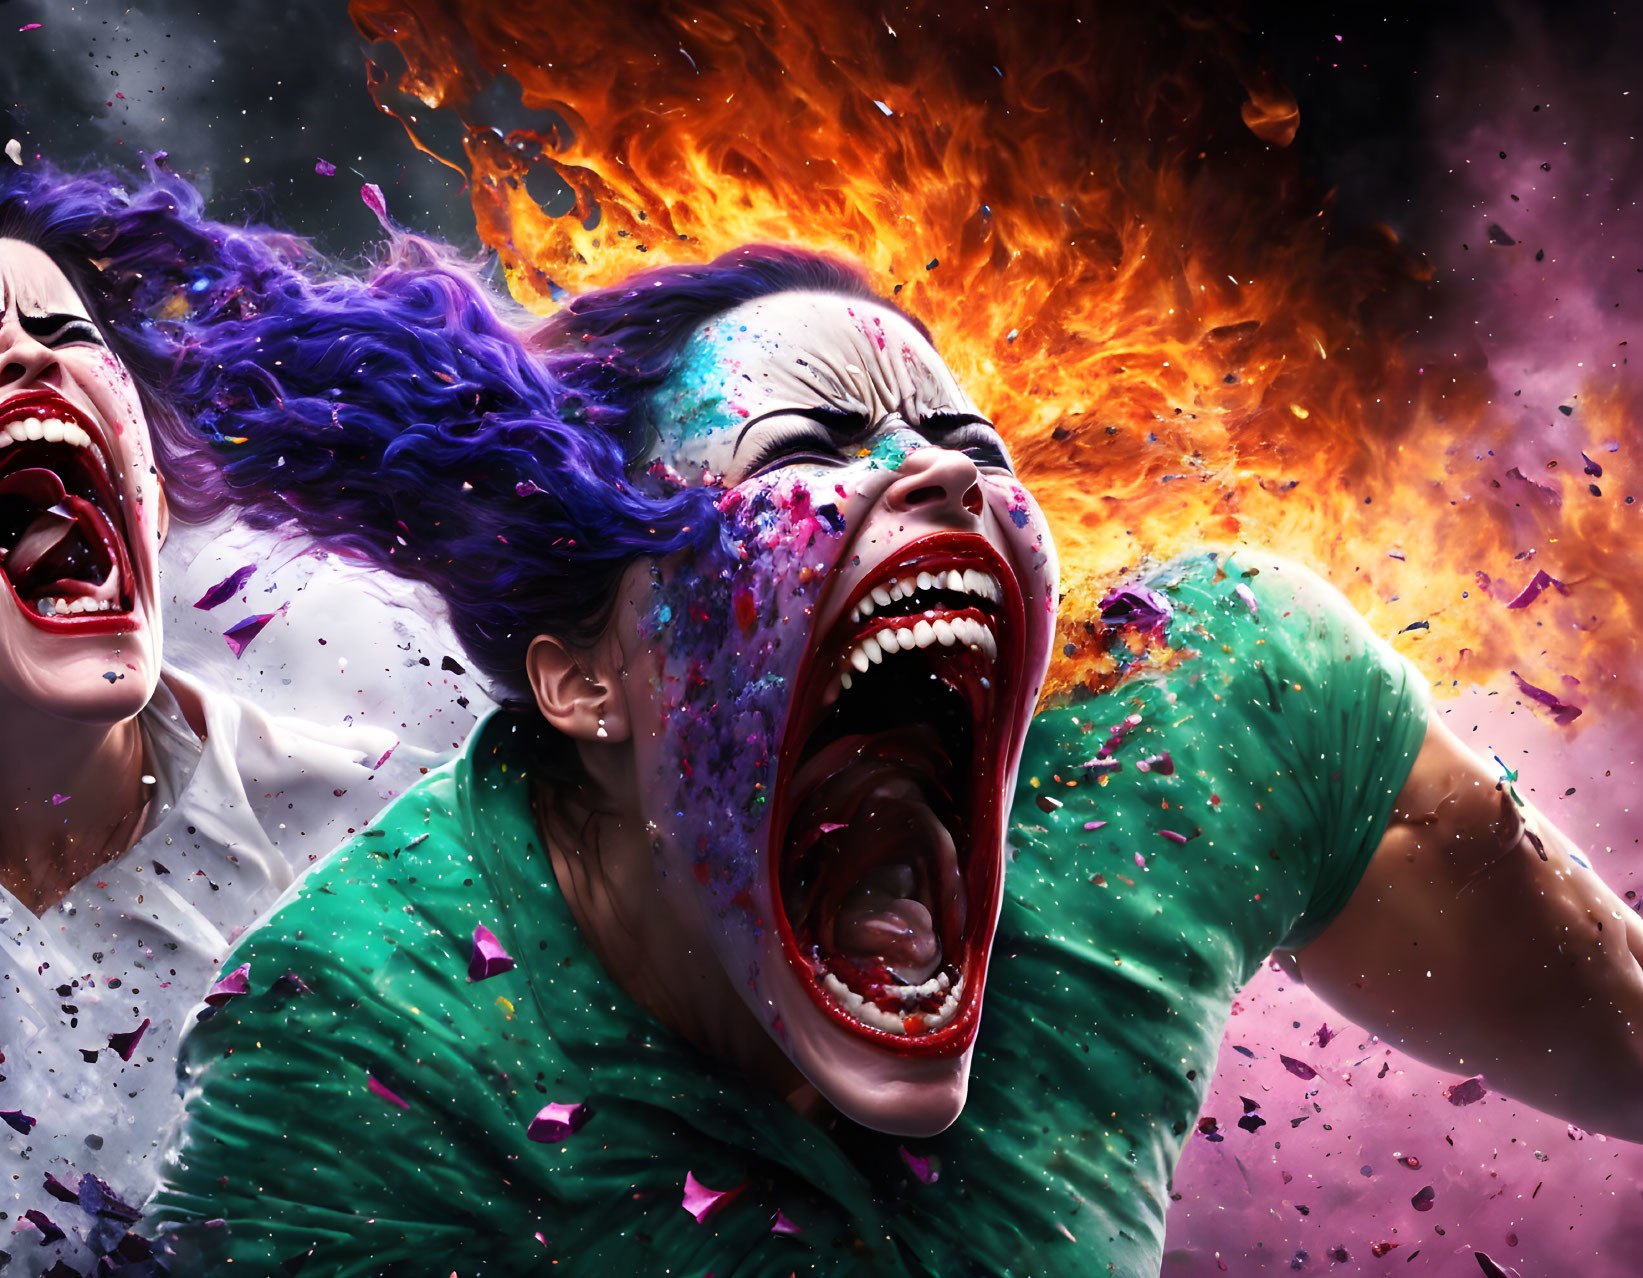 Two Women Screaming with Vibrant Face Paint in Front of Flames and Debris